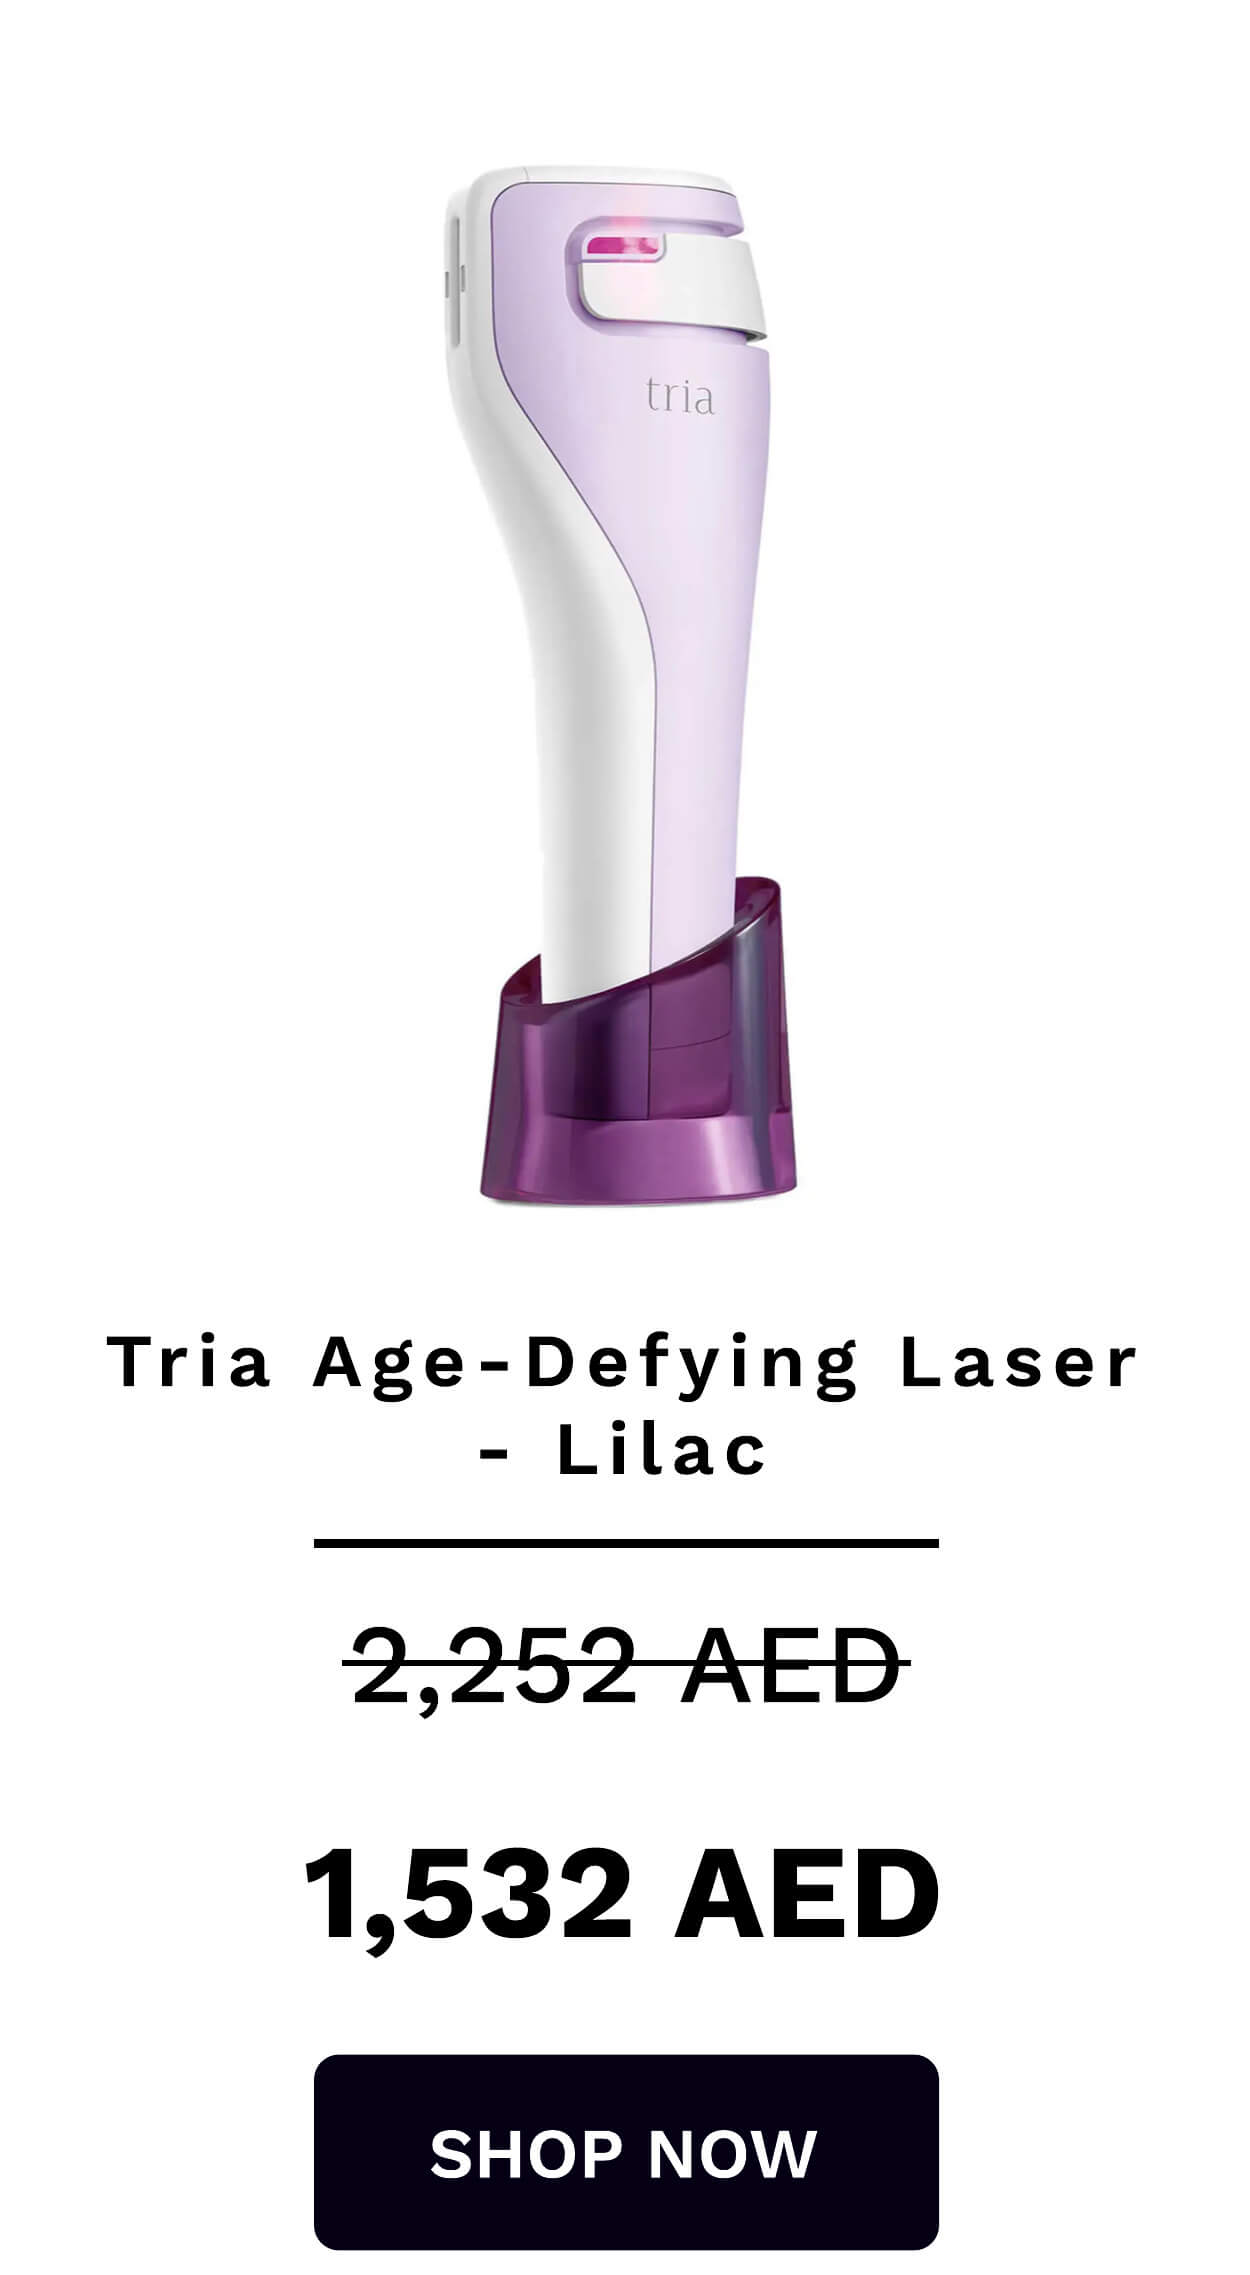  Tria Age-Defying Laser - Lilac 2,252-AED 1,532 AED SHOP NOW 